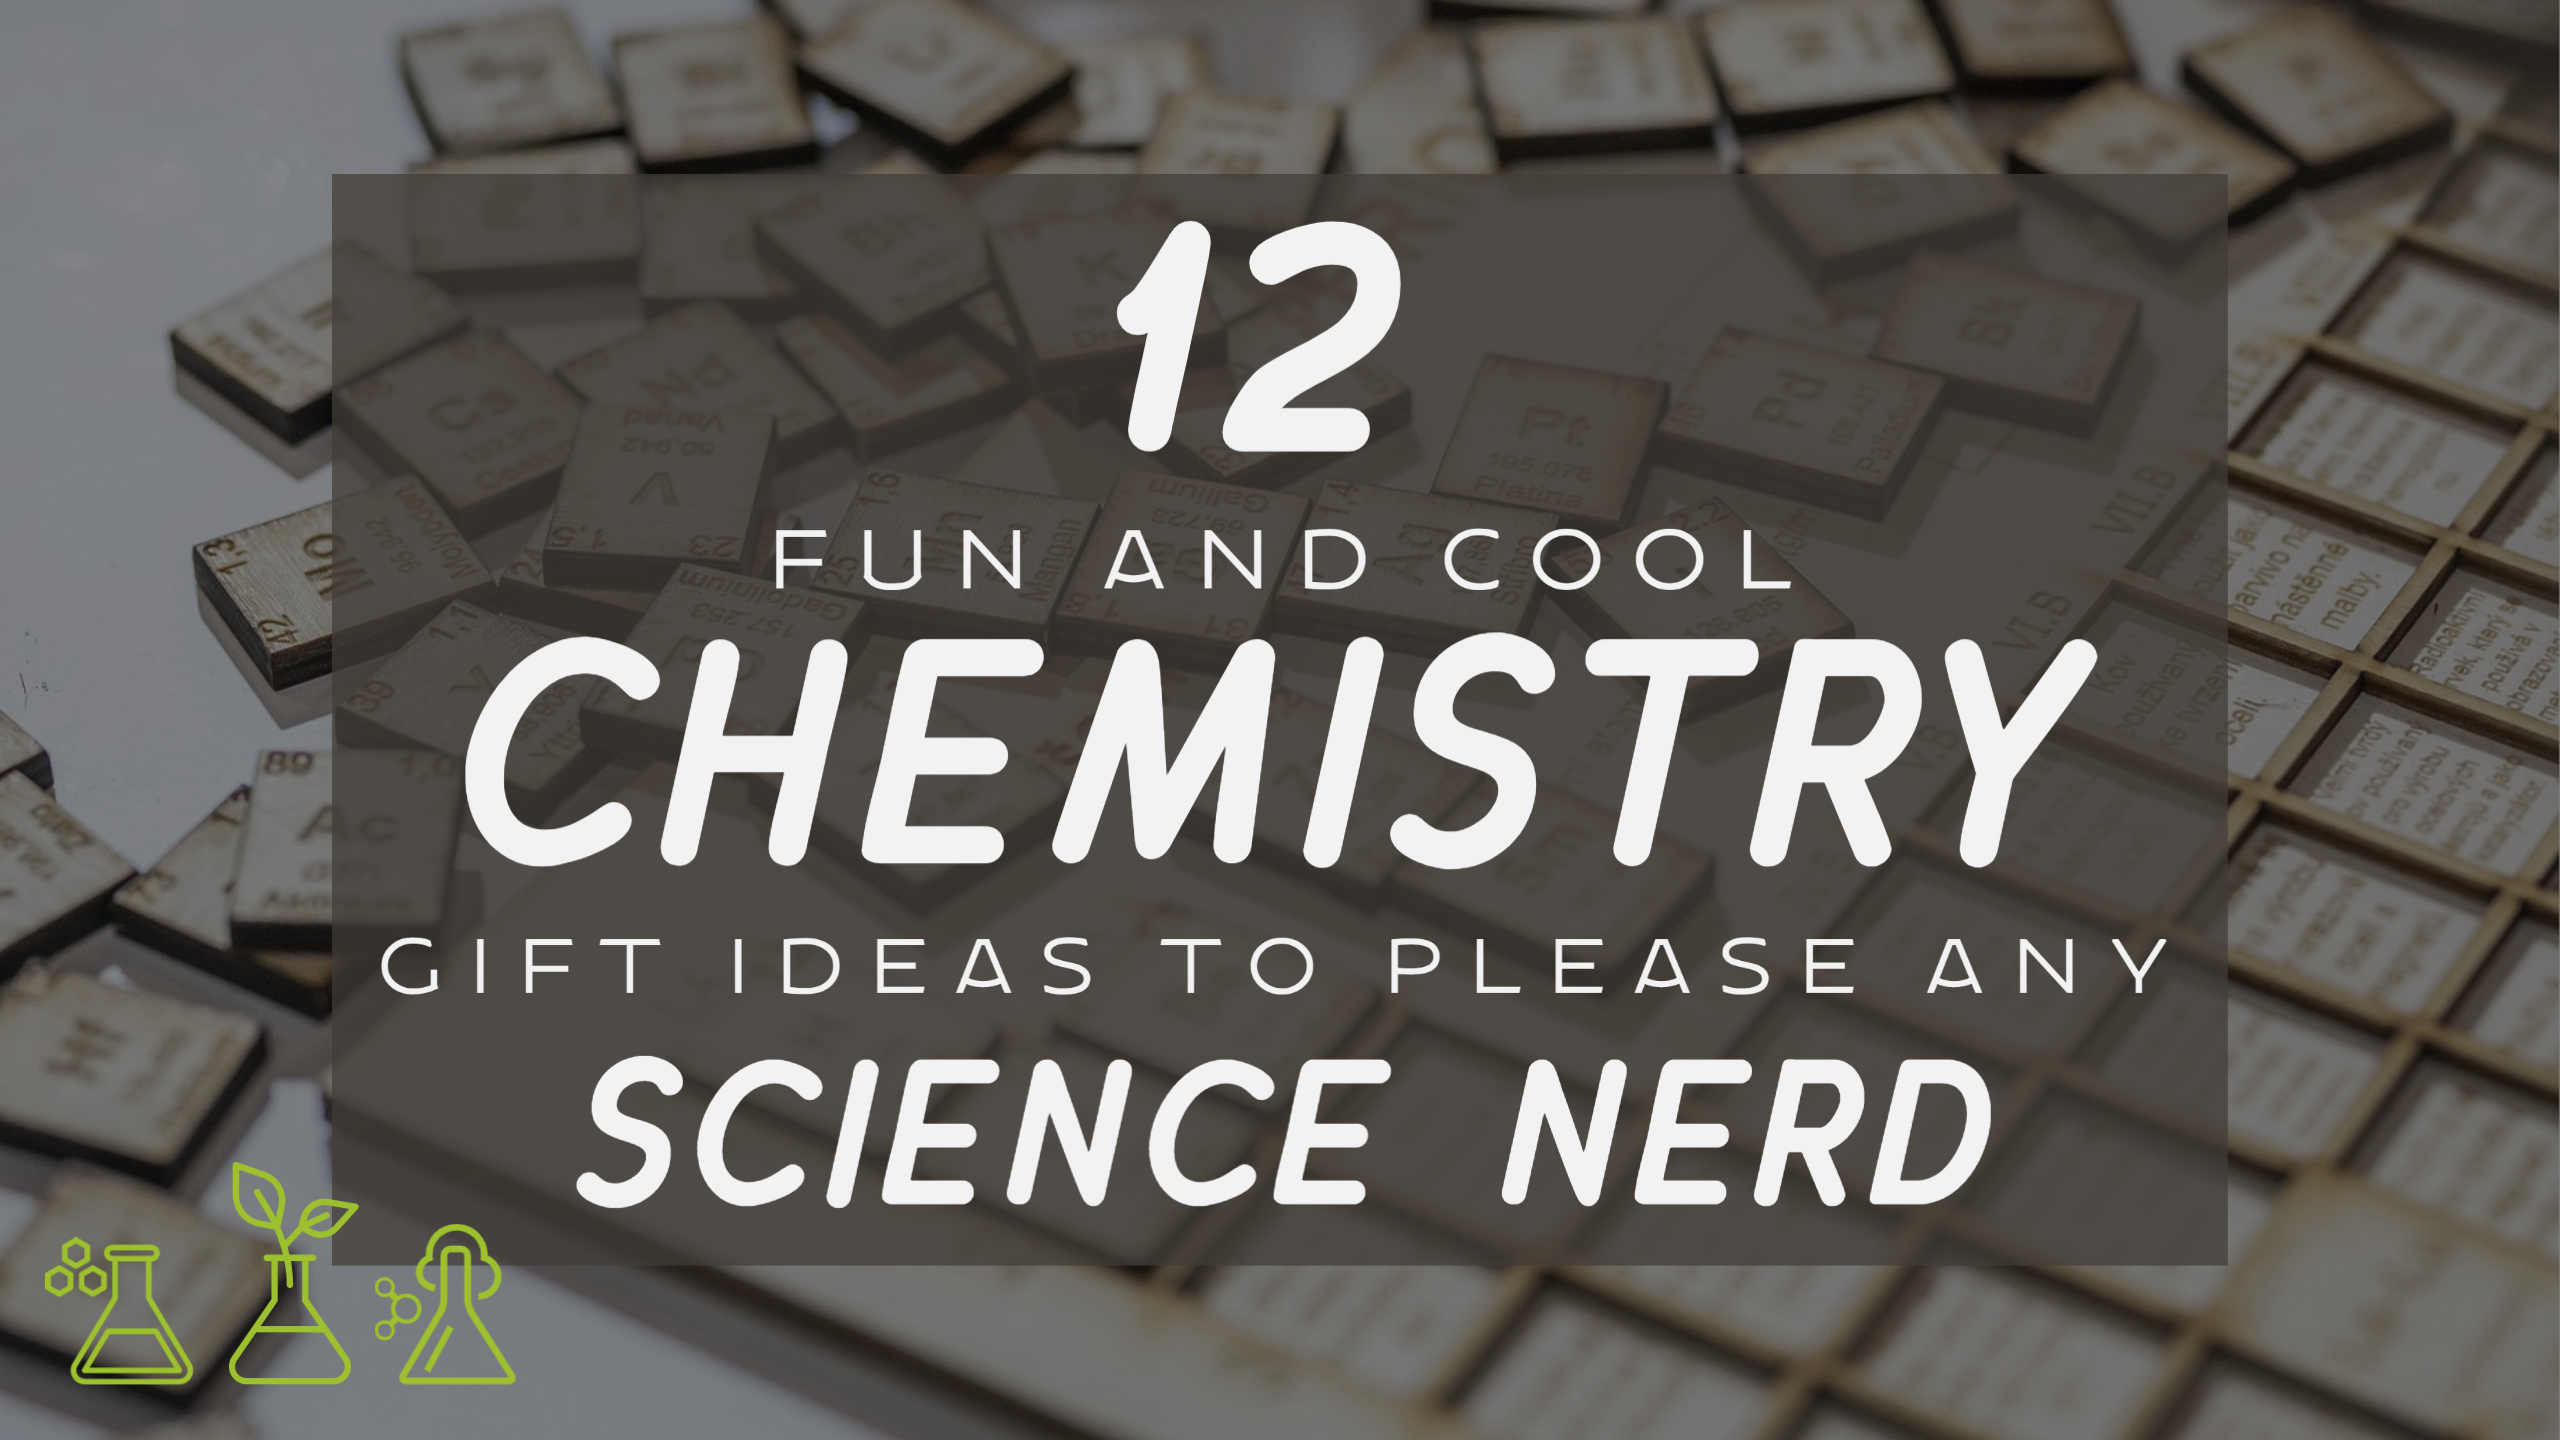 12 Fun And Cool Chemistry Gift Ideas To Please Any Science Nerd Header